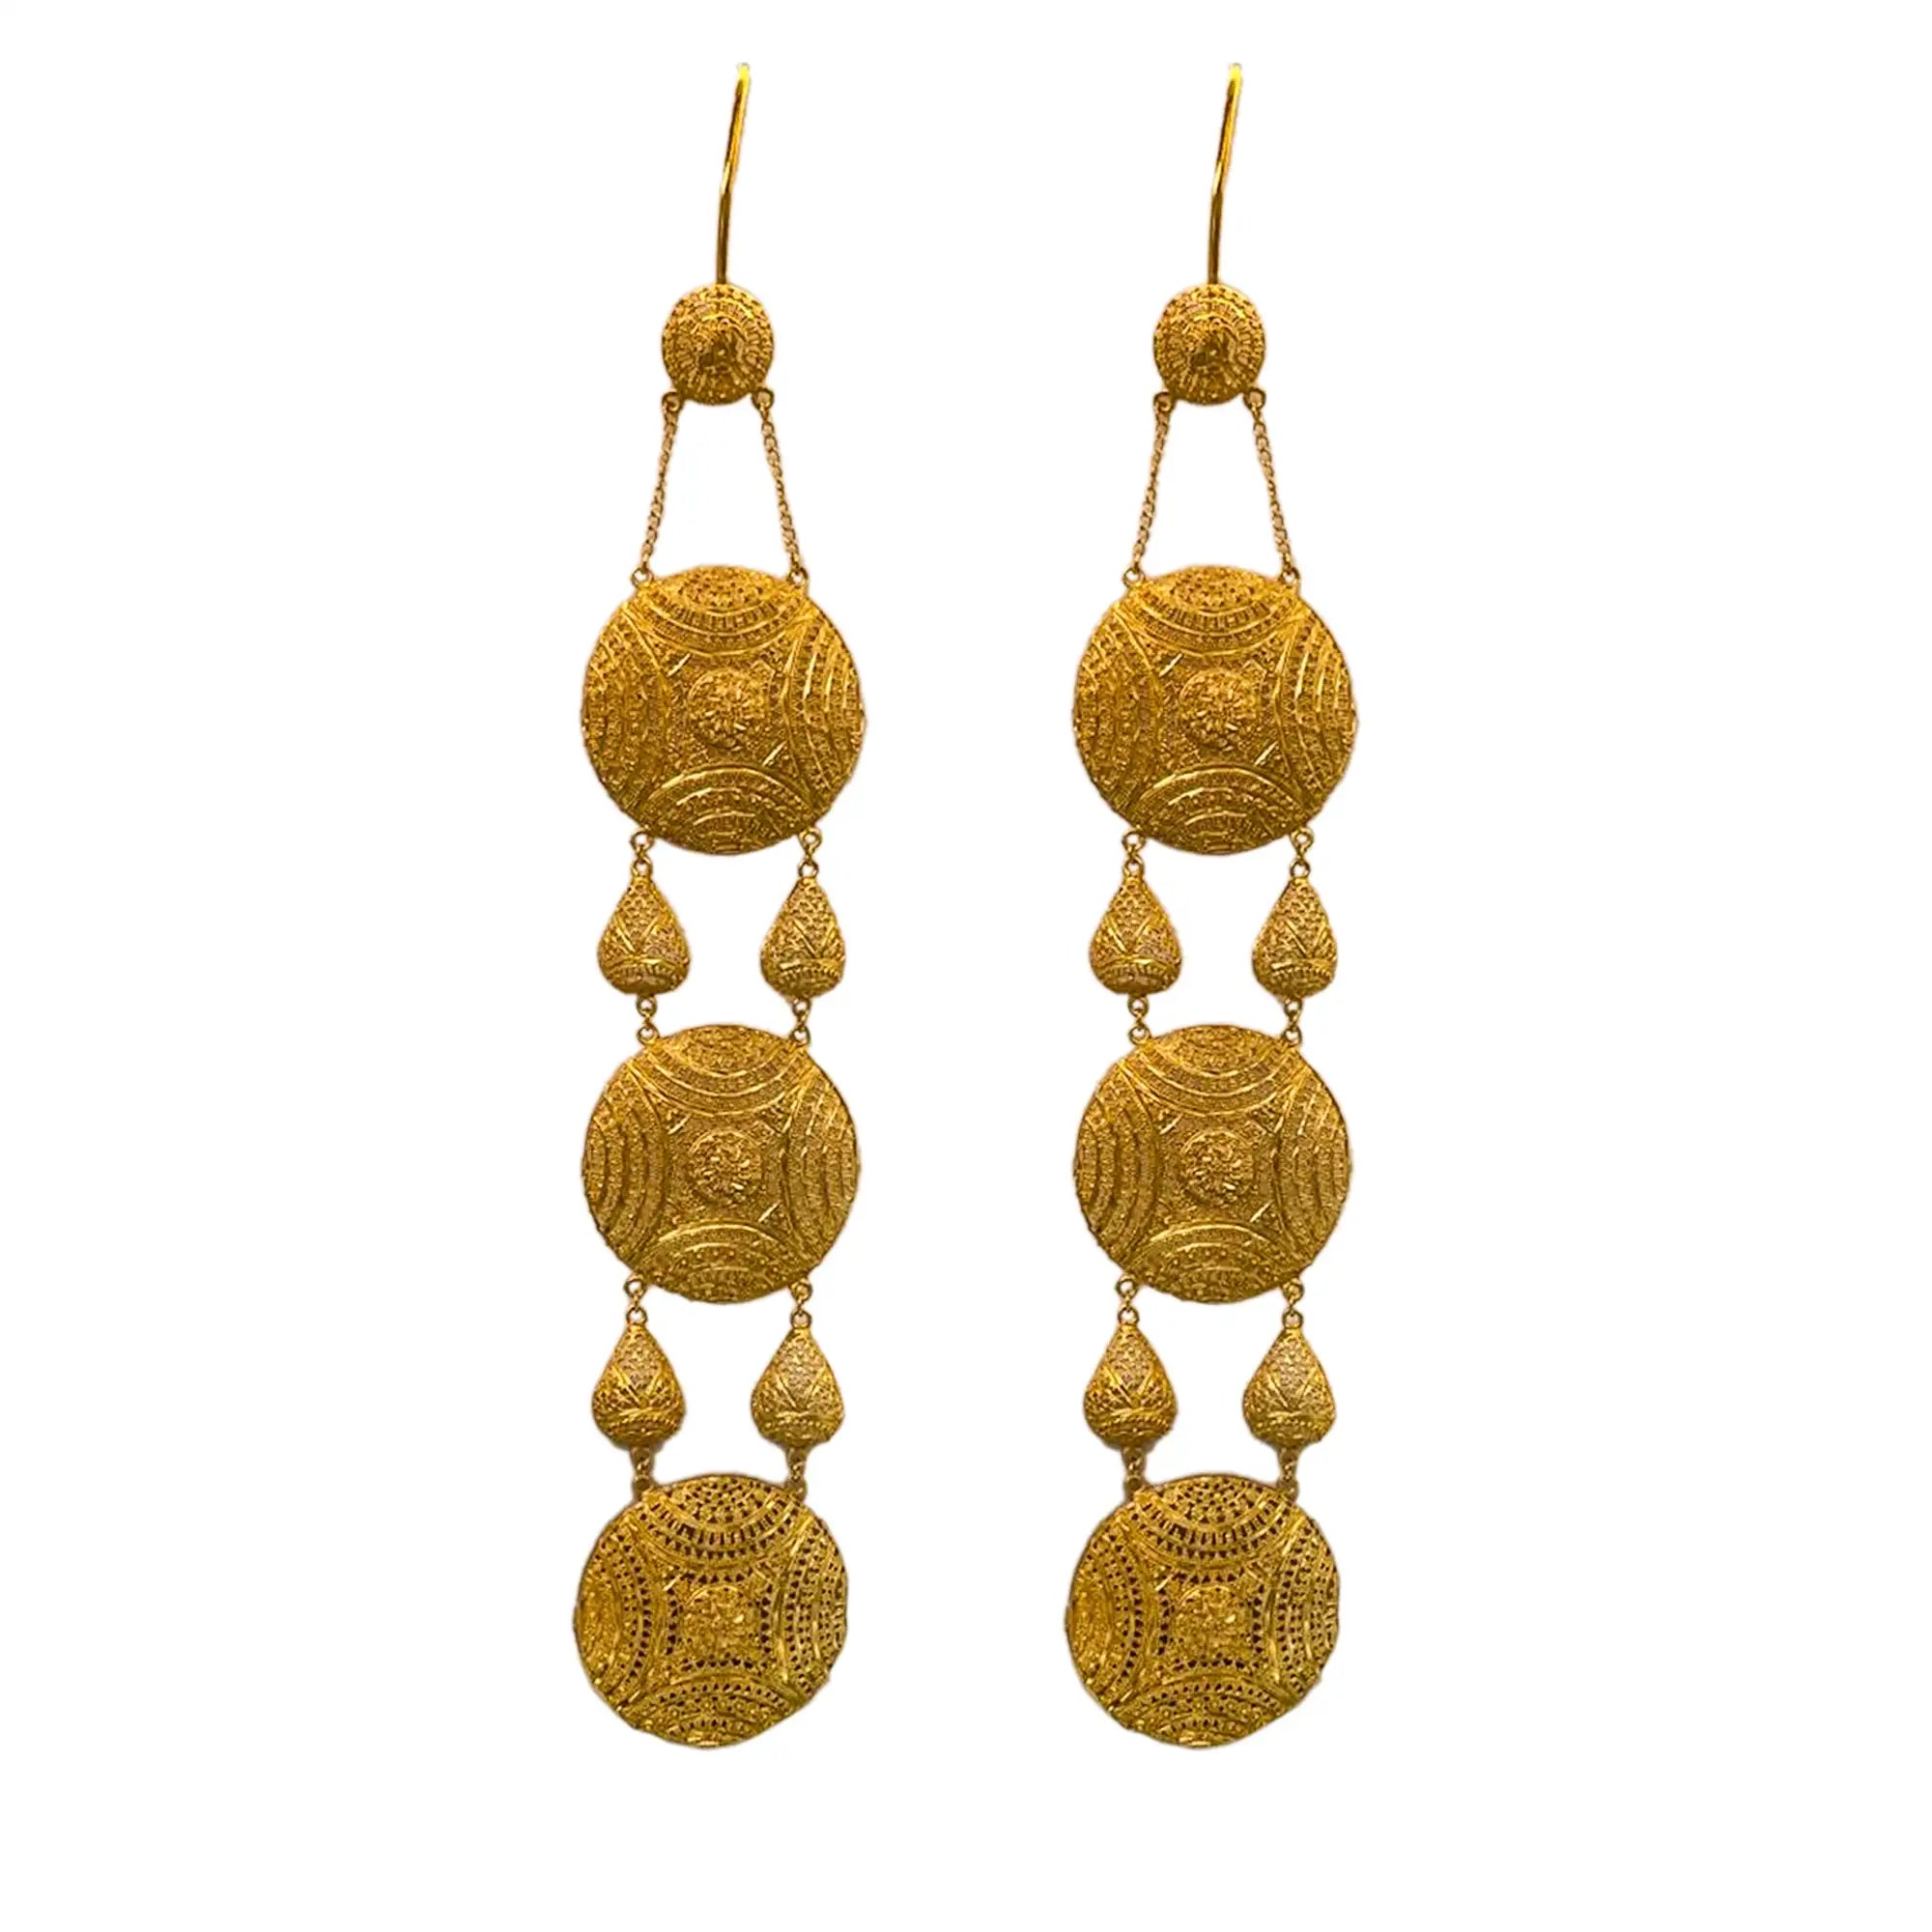 Gold-Plated Earrings, Gold-Plated Jewelry, Bridal Jewelry, Extra Large Statement Earrings, Indian Jewelry Mall